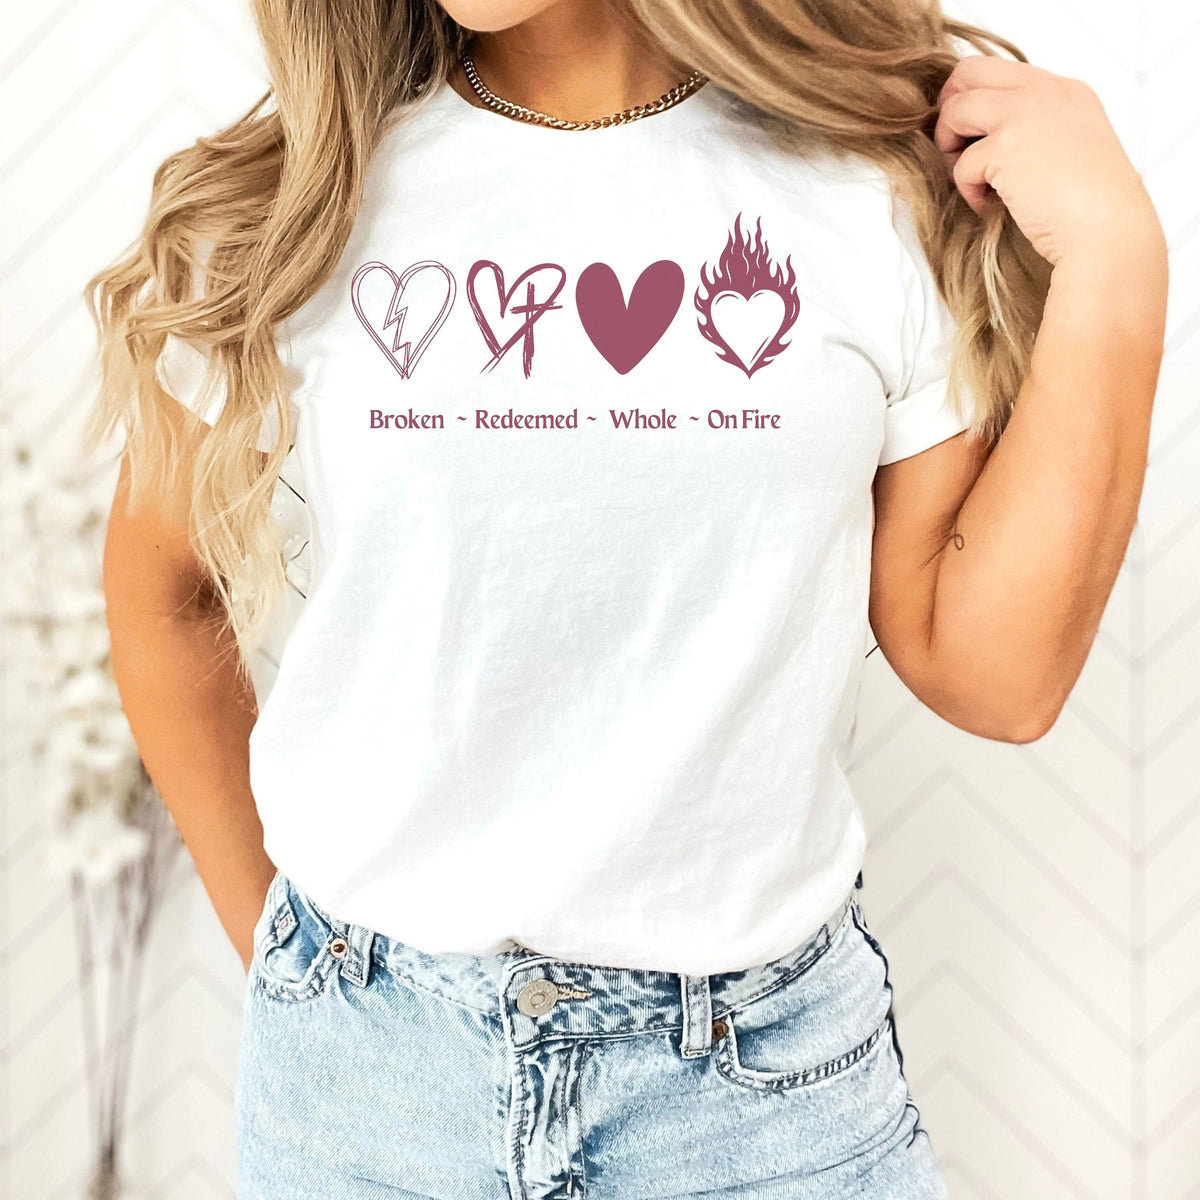 Christian Women&#39;s T Shirt Broken Heart Tee Shirt Redeemed Heart T-Shirt Whole Heart Shirt Heart on Fire Mother&#39;s Day Gift for Friend Cute - The Ripple Effect Co.US